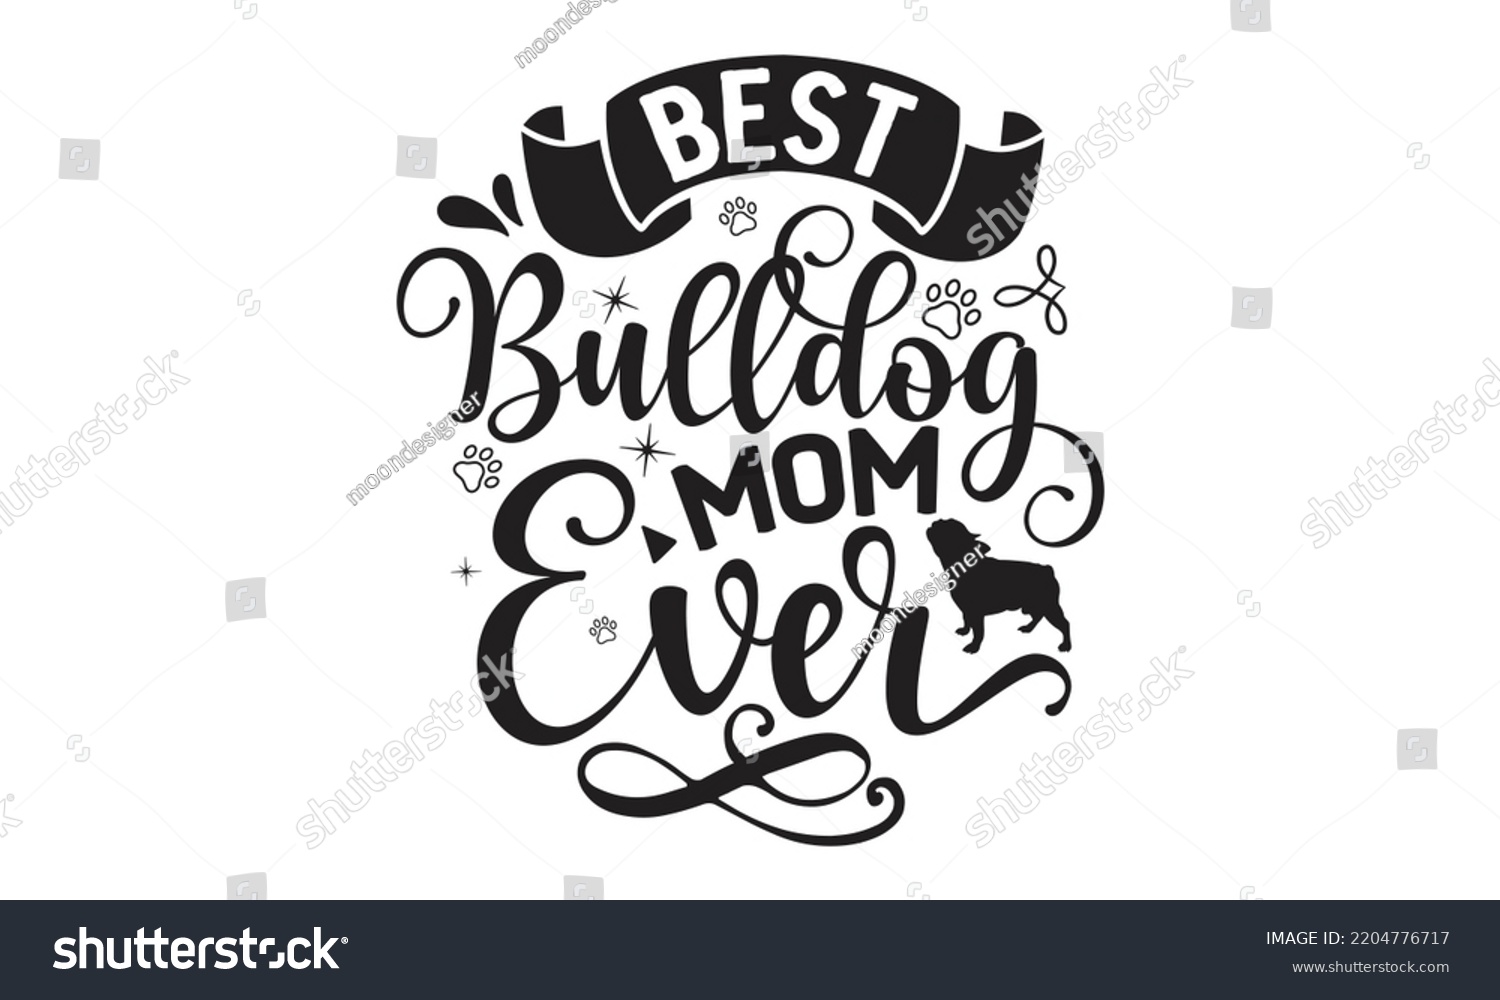 SVG of Best bulldog mom ever - Bullodog T-shirt and SVG Design,  Dog lover t shirt design gift for women, typography design, can you download this Design, svg Files for Cutting and Silhouette EPS, 10 svg